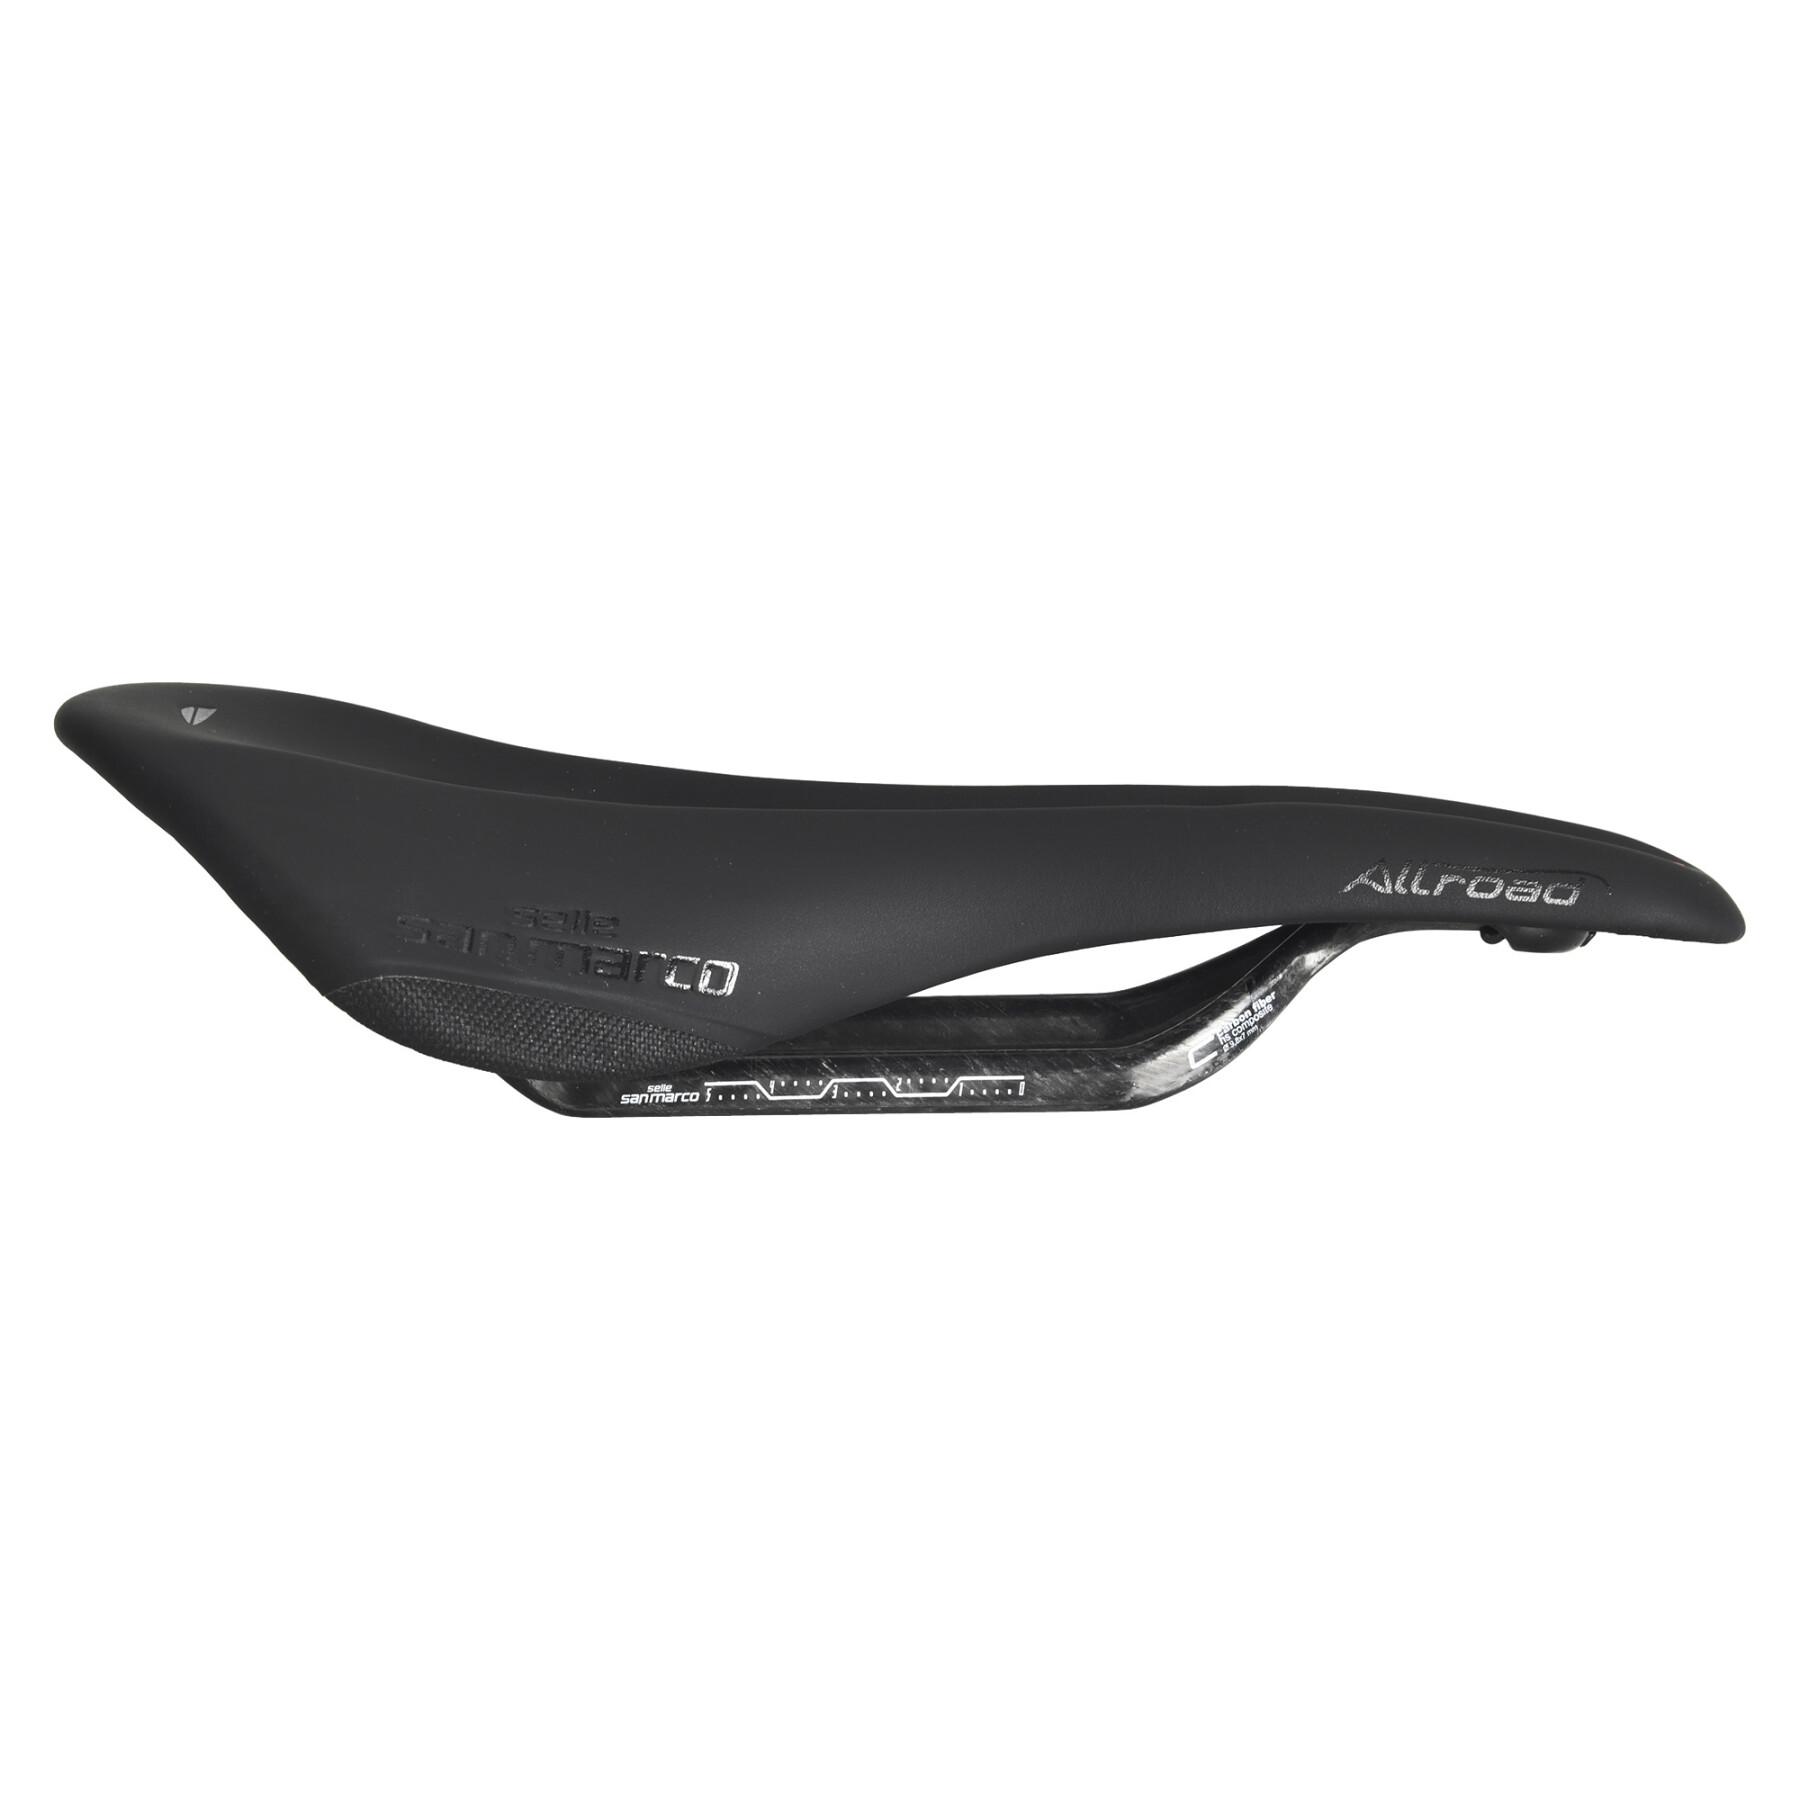 Sella Selle San Marco Allroad Open-Fit Carbon FX